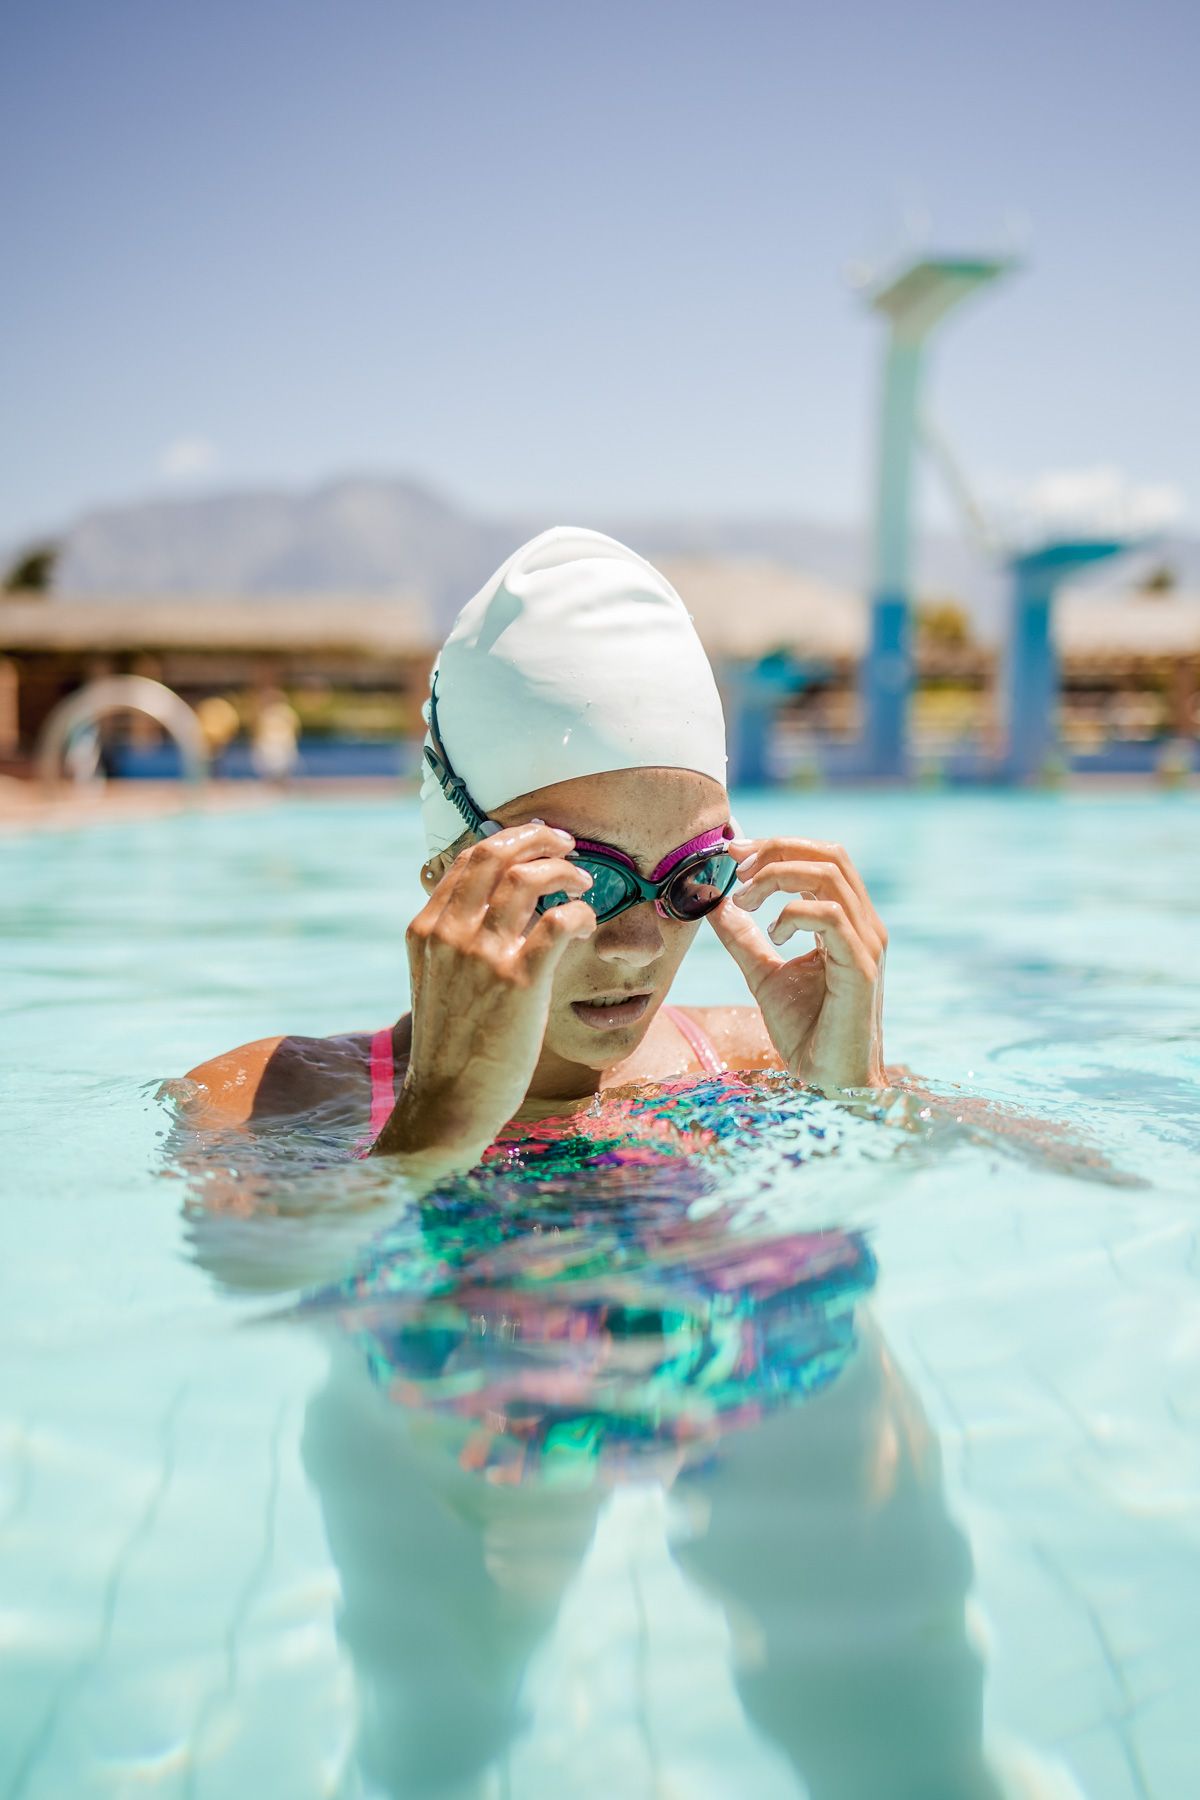 A young female swimmer in a white swimcap pokes here head out of the pool to adjust her goggles on a sunny day, with the background in soft focus.